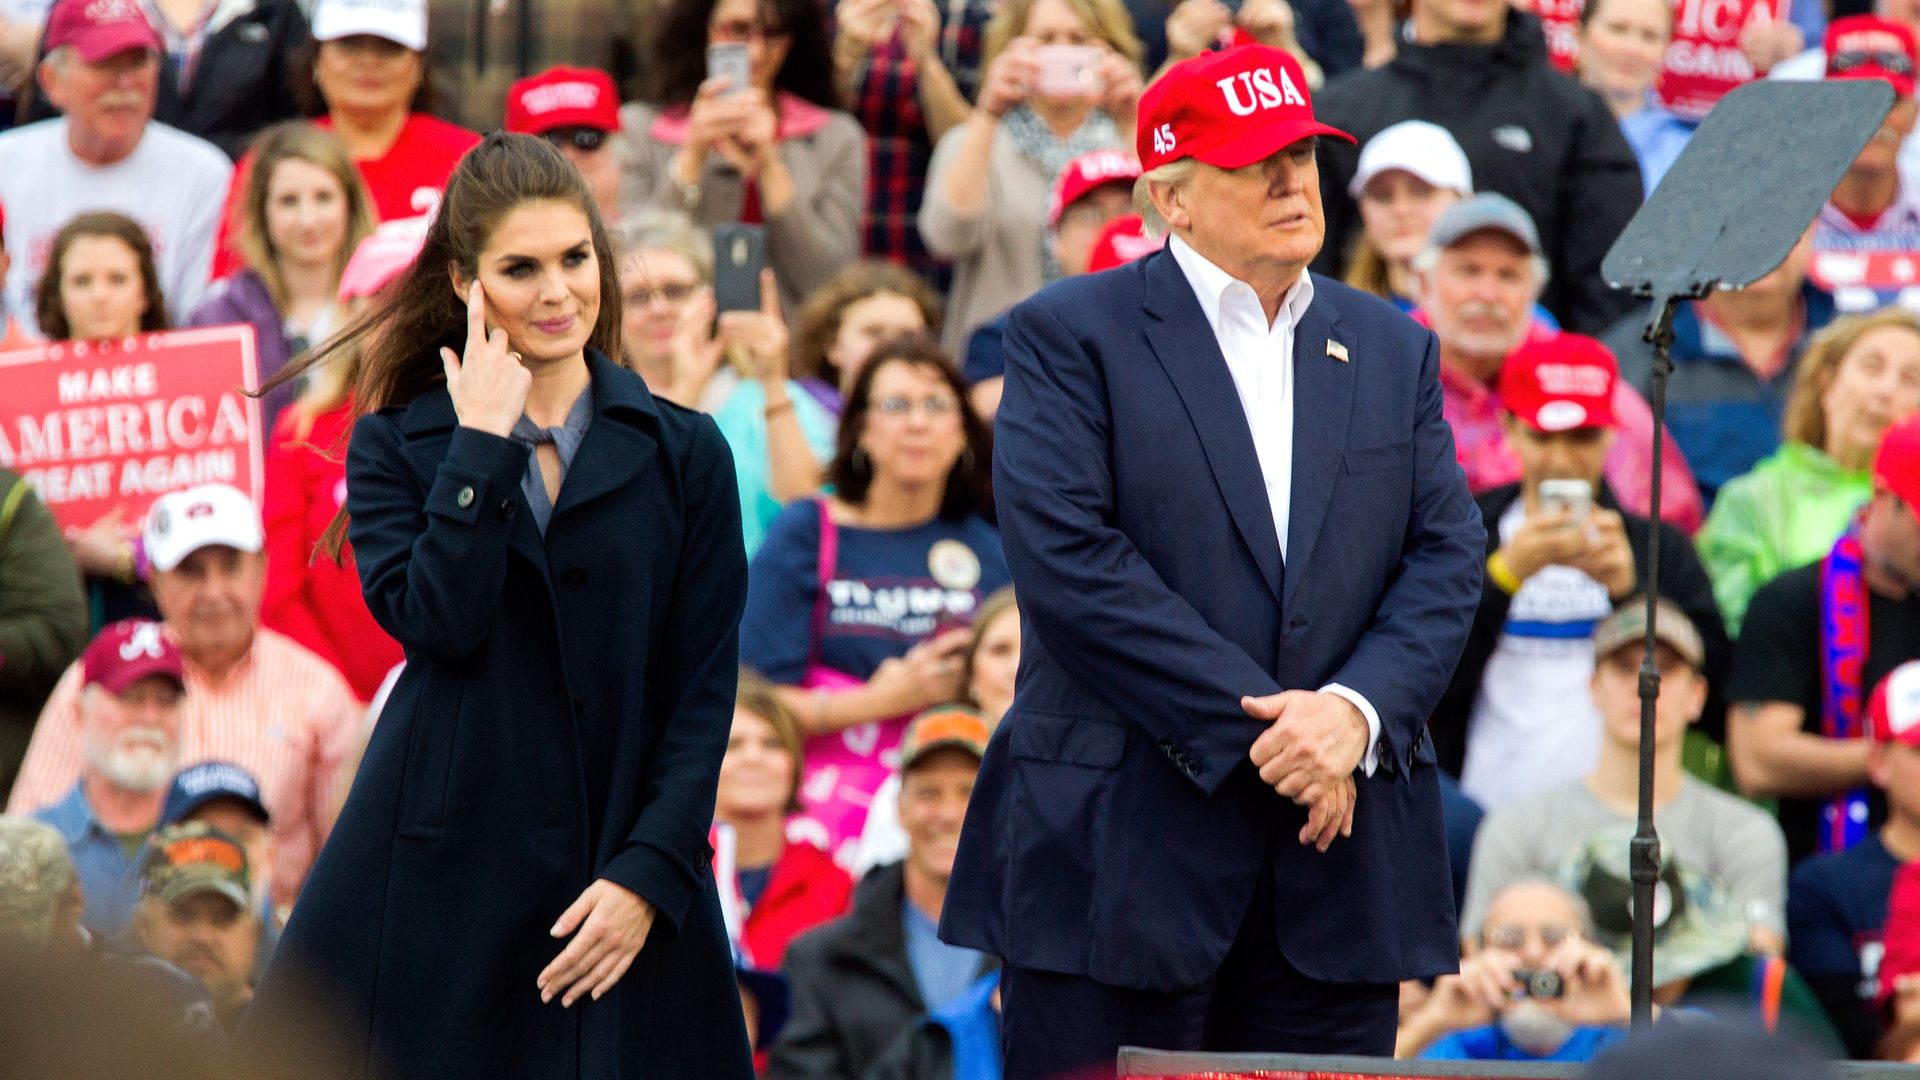 Hope Hicks with Trump at rally